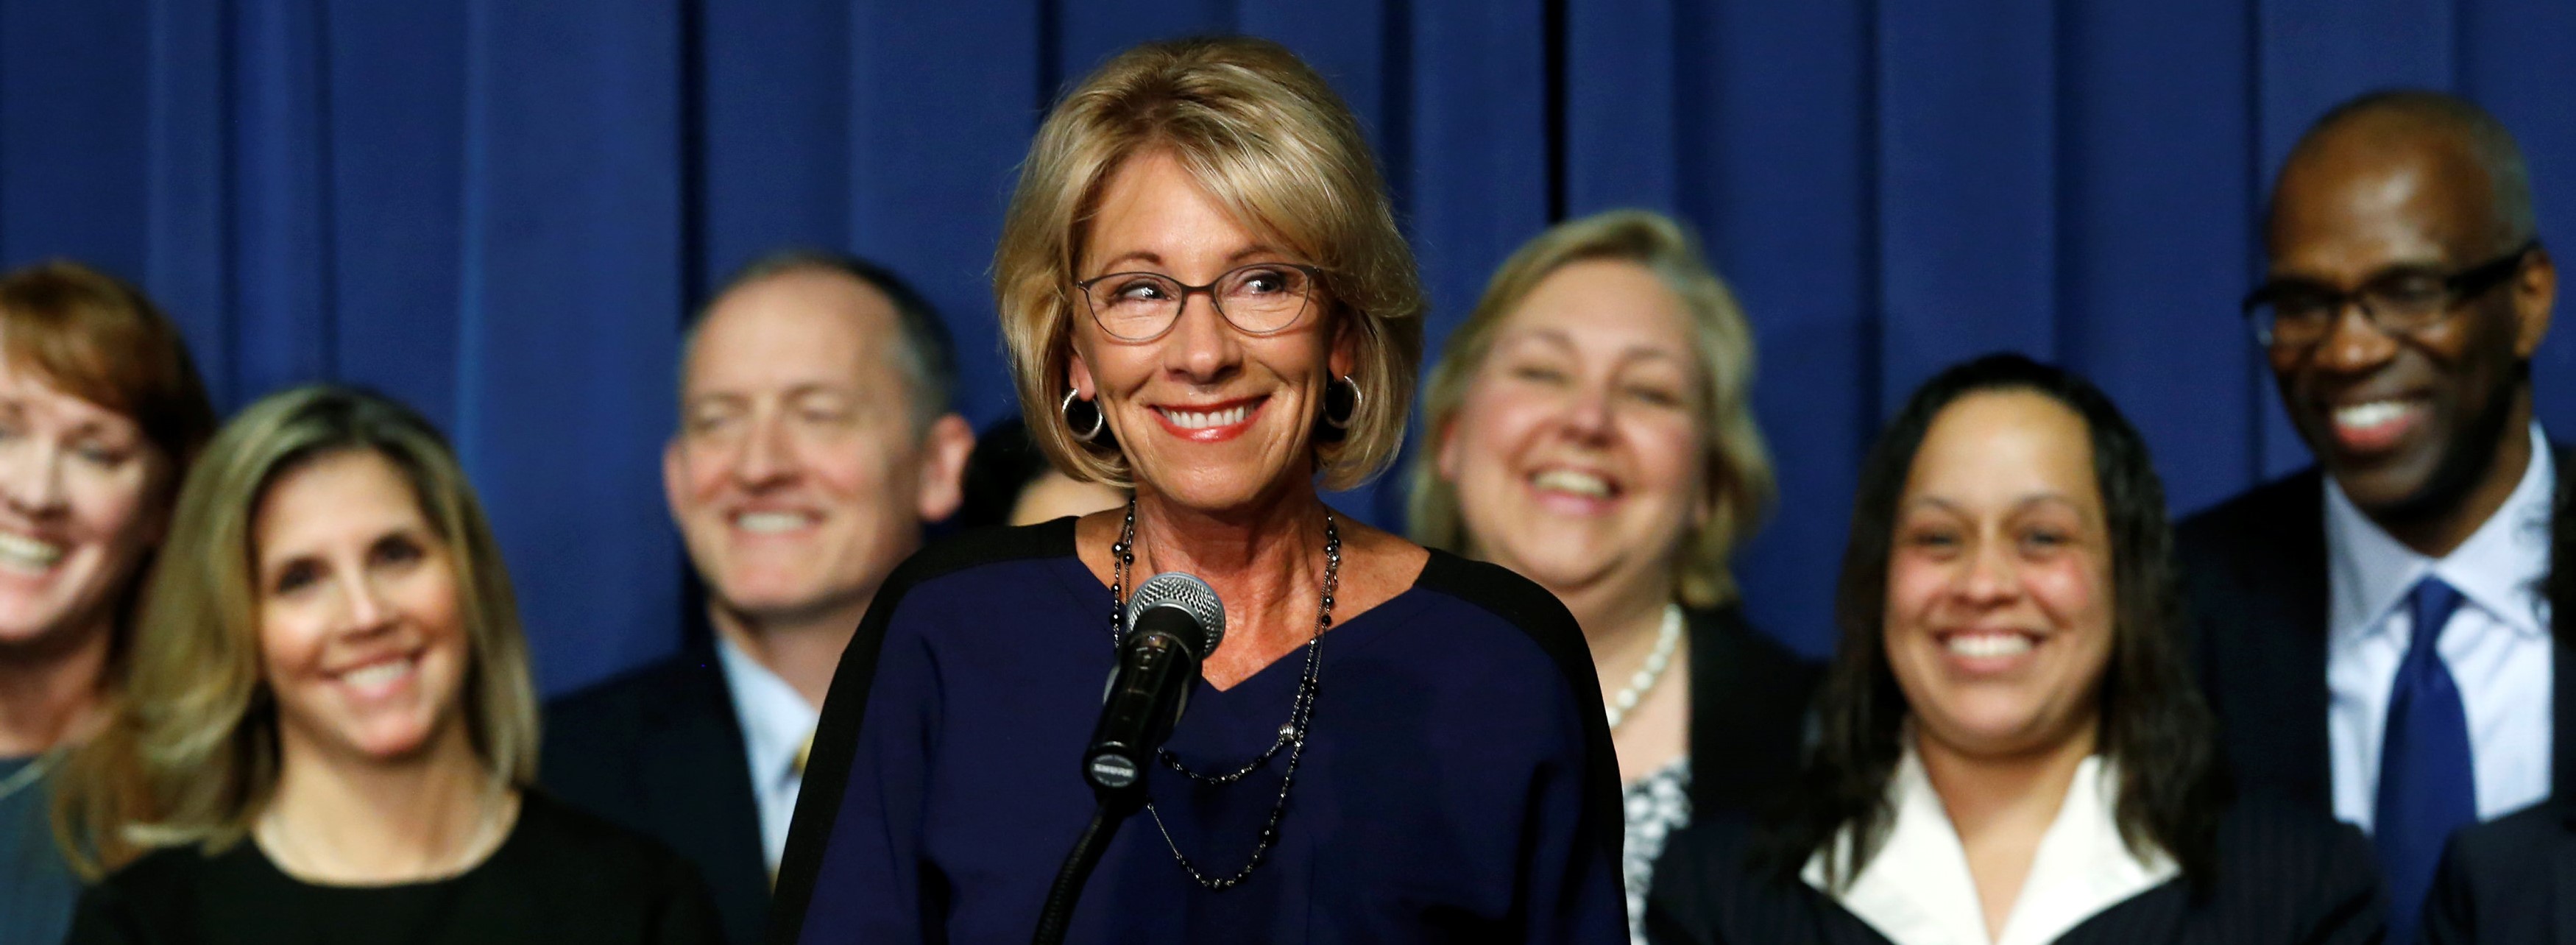 Betsy DeVos wins this year's worst Halloween costume - and people are not happy